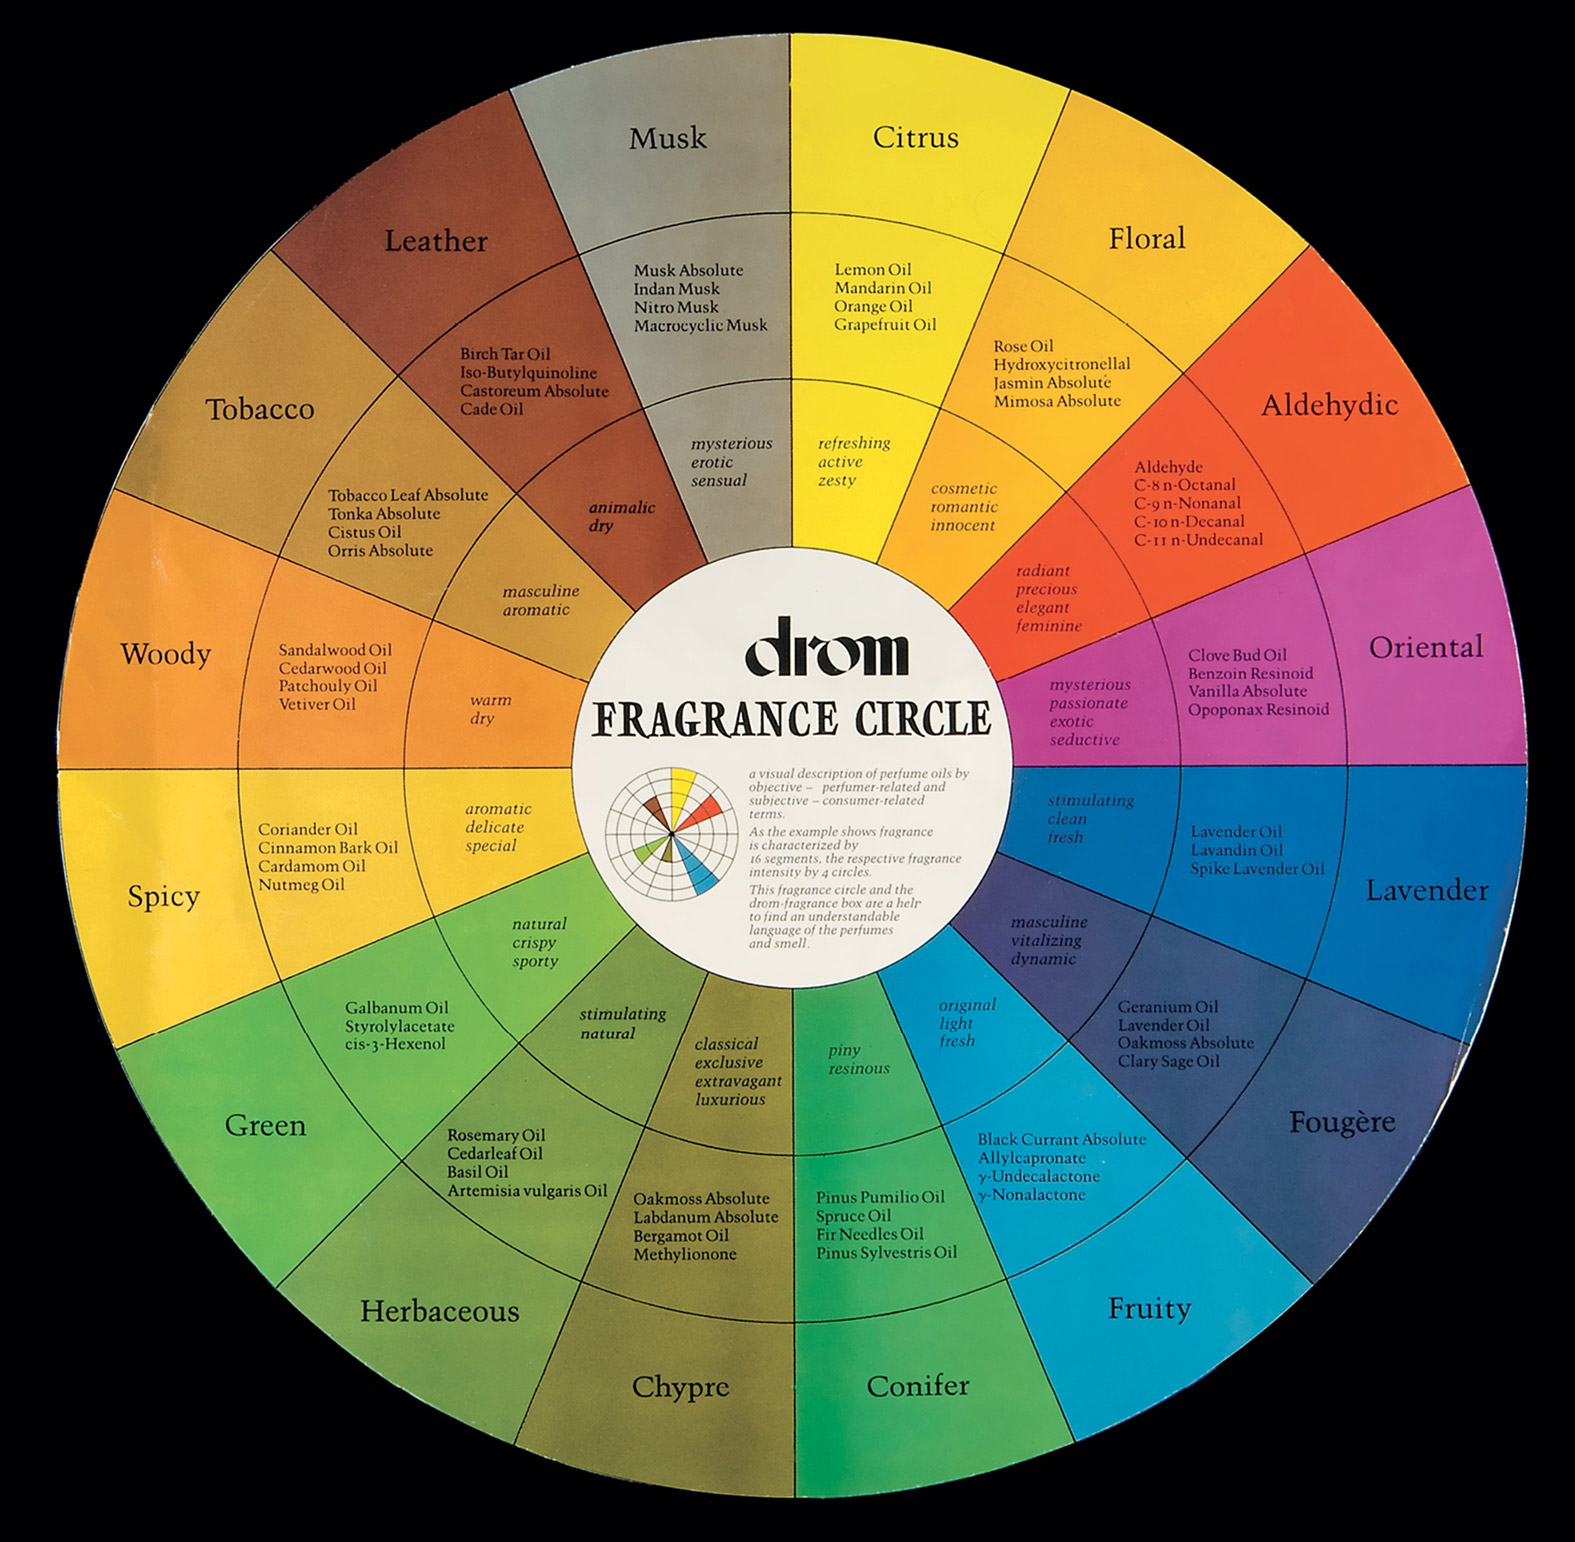 A photograph of a fragrance circle used by Drom, a global scent company. 